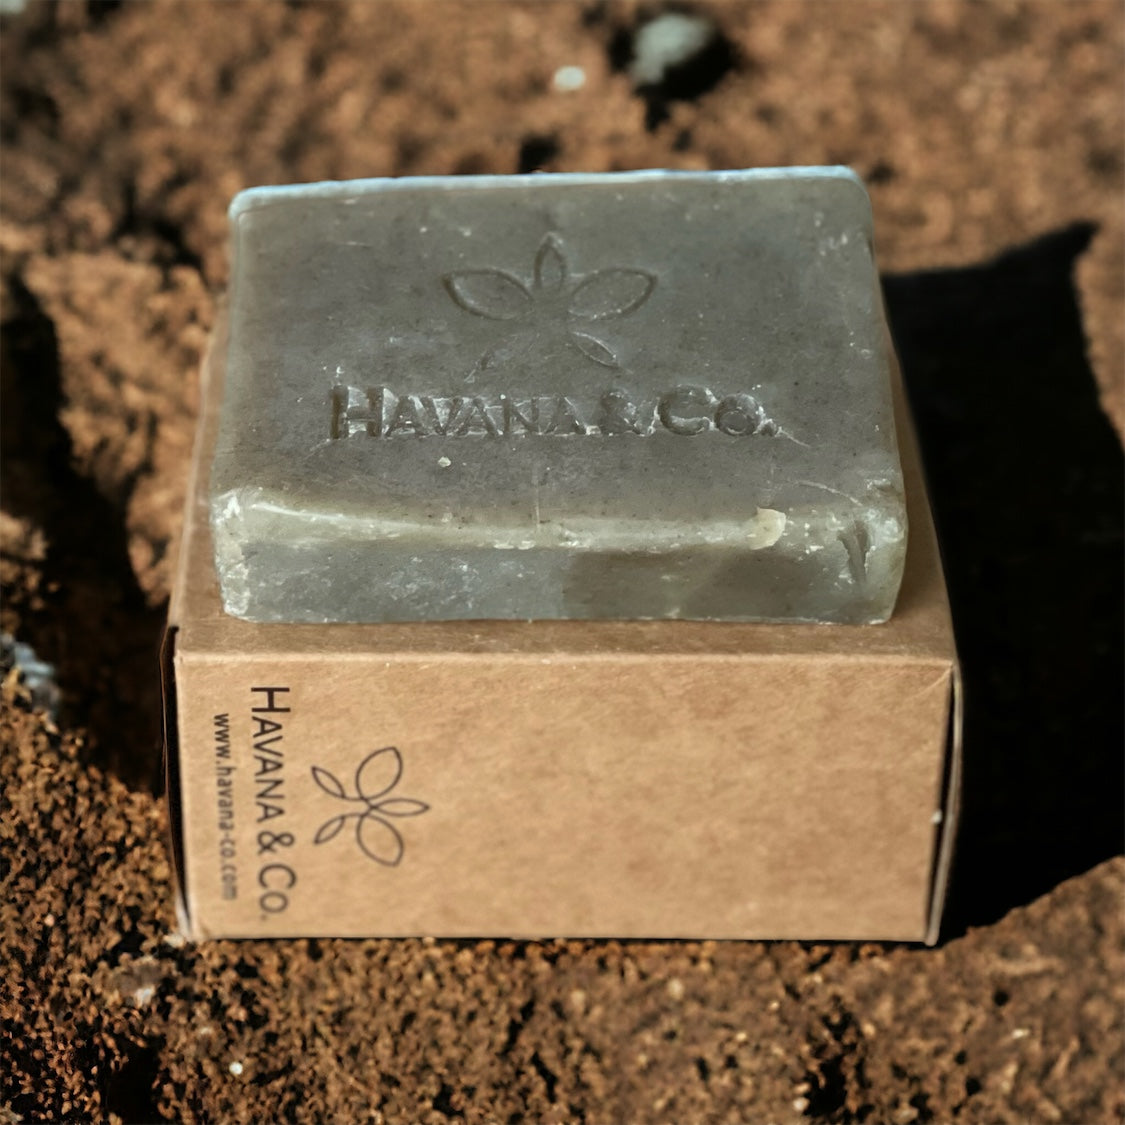 Refresh and Renew Your Skin with Green Tea-Infused Body Soap for a Rejuvenating Cleanse